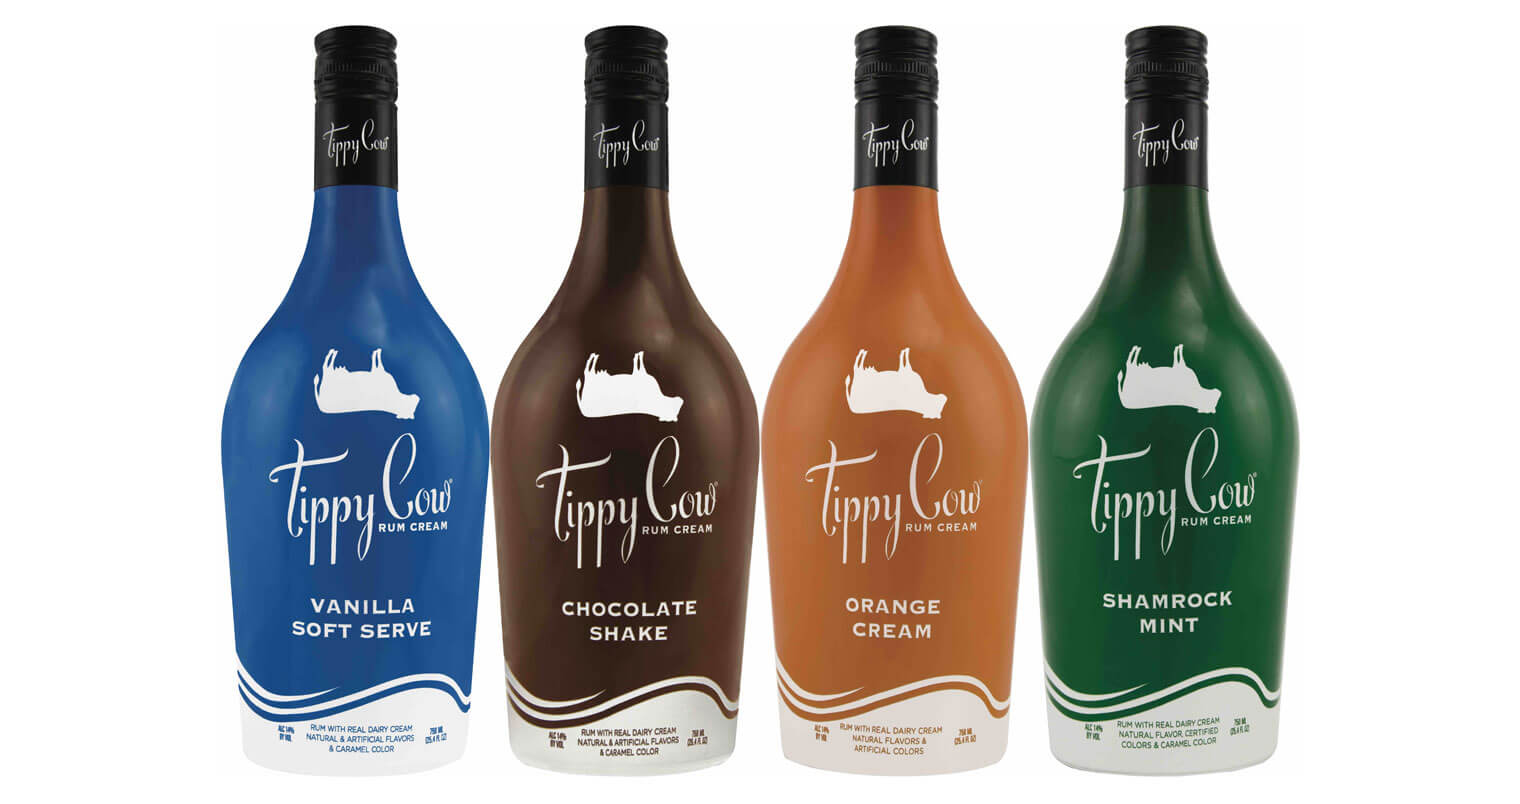 Tippy Cow Rum Cream New Look, featured image